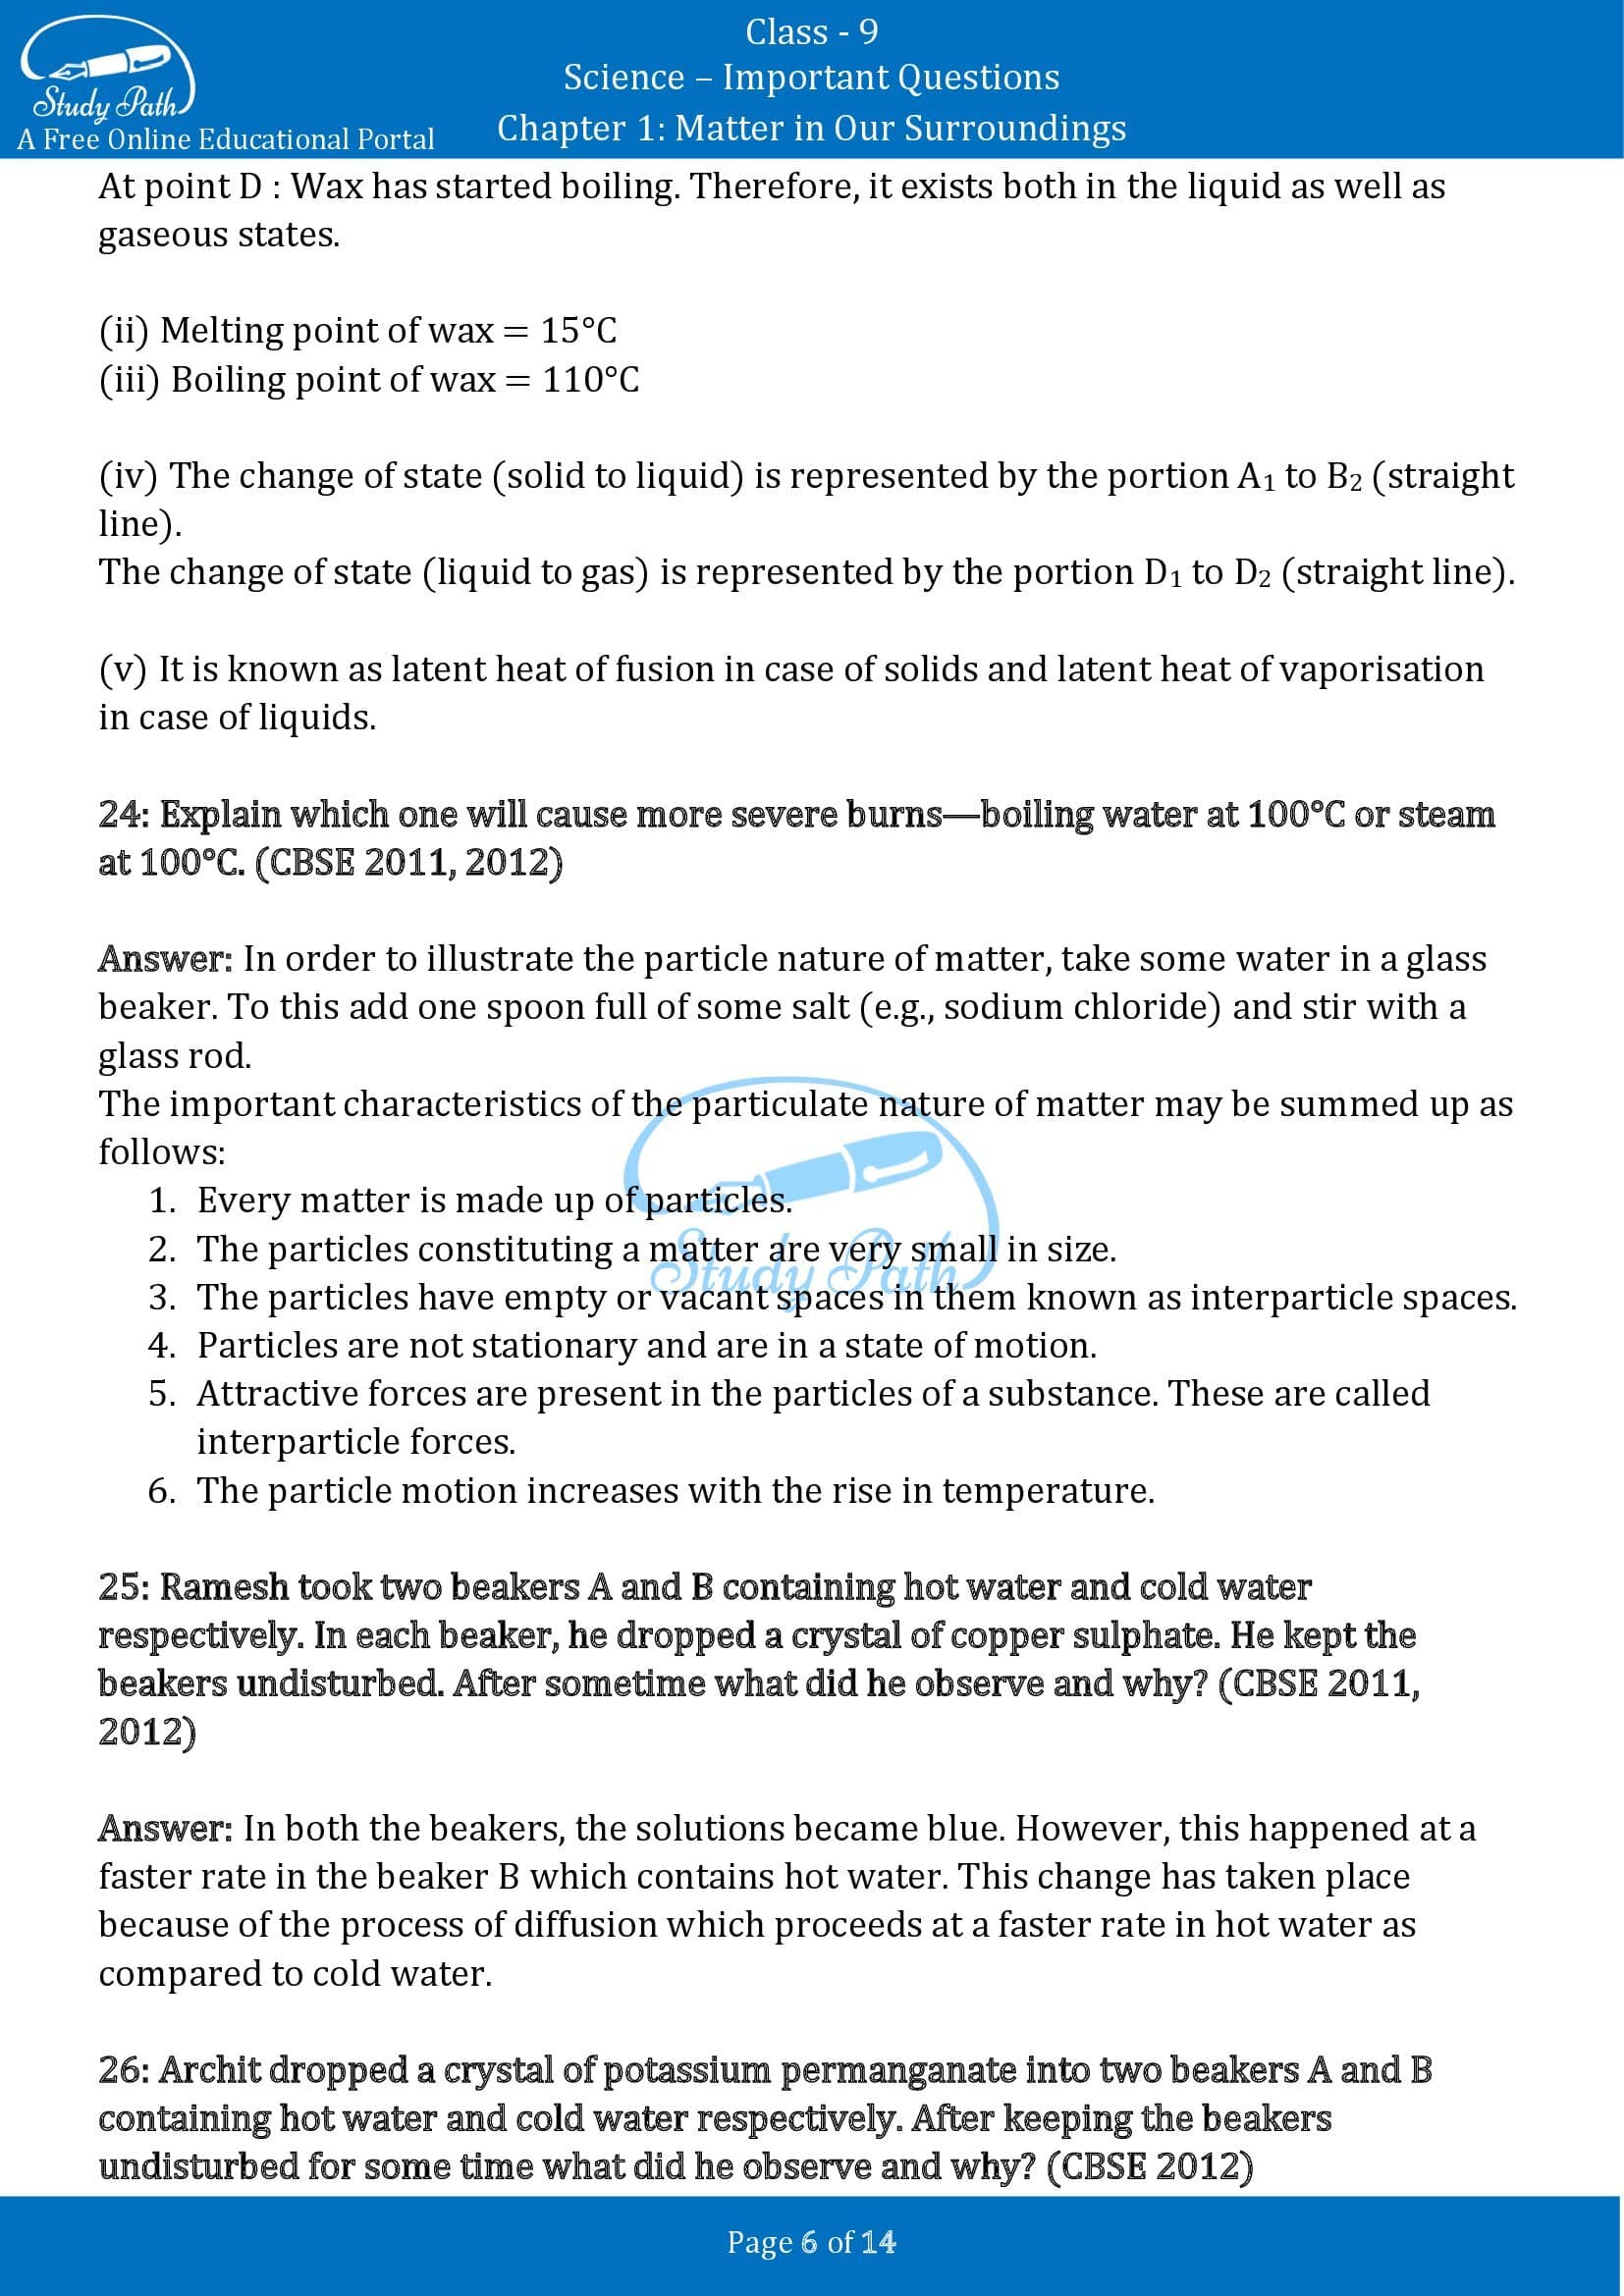 class 9 science case study questions 2021